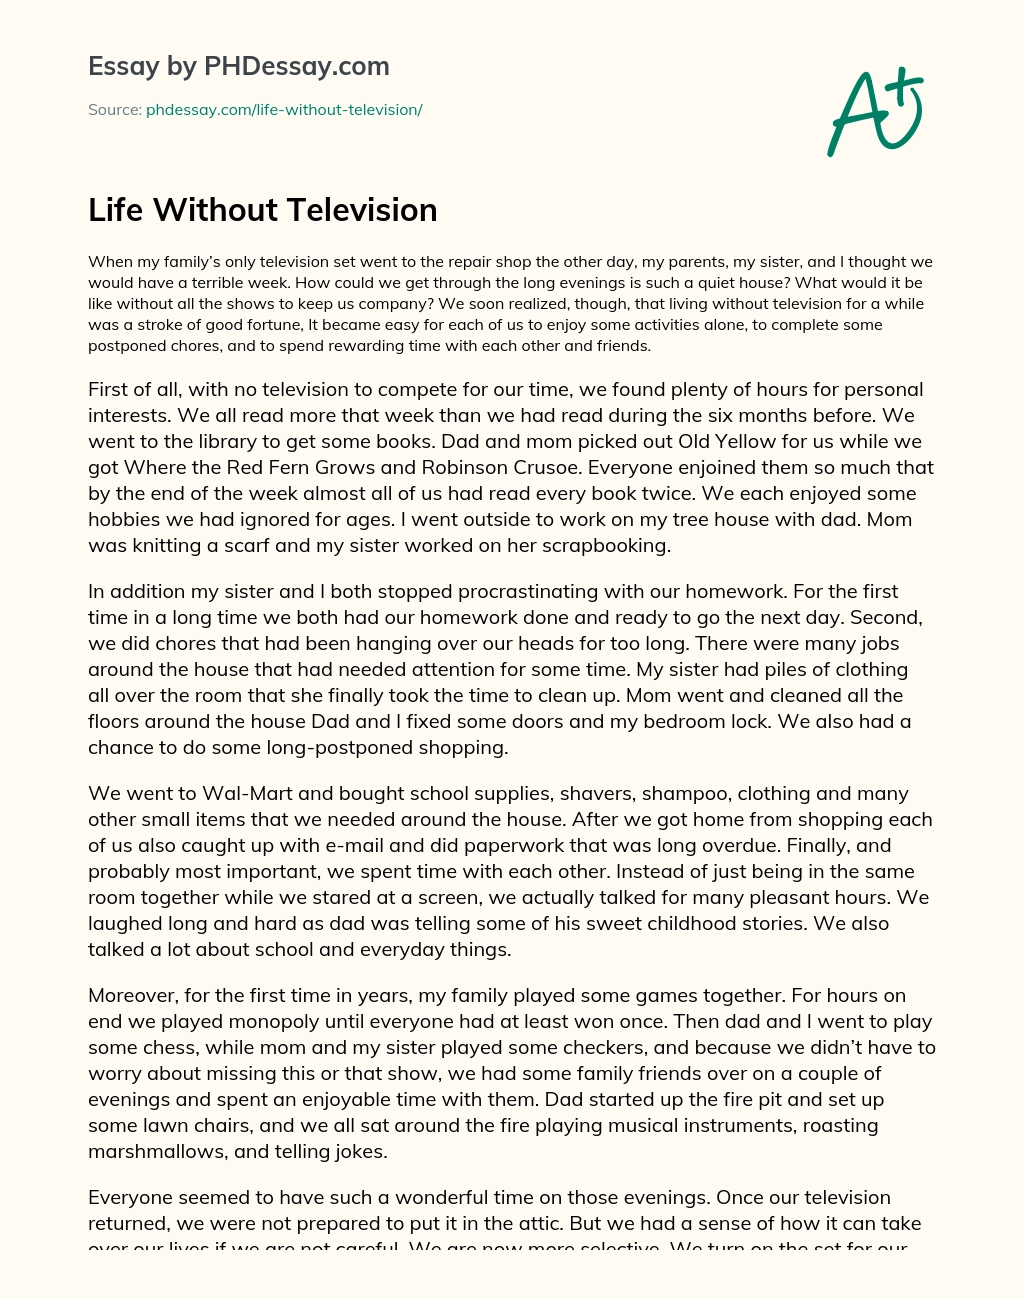 life without television essay in hindi